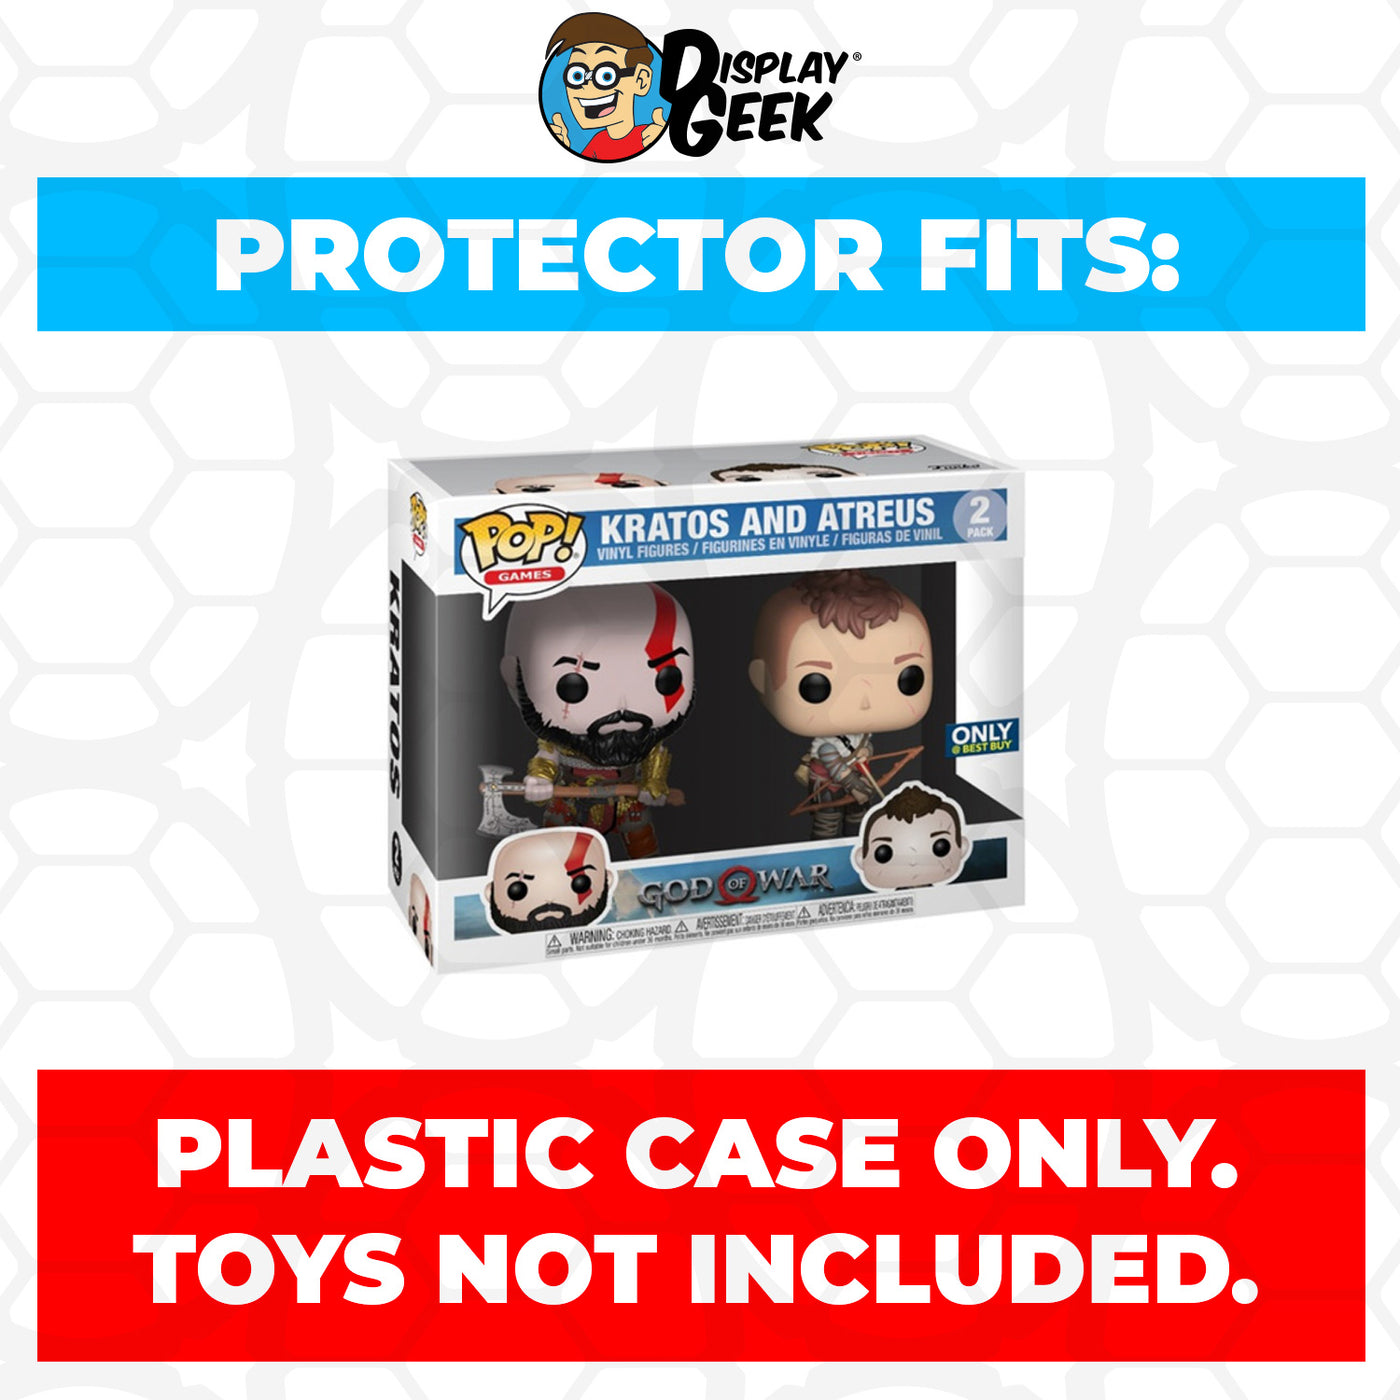 Pop Protector for 2 Pack Kratos & Atreus Funko Pop on The Protector Guide App by Display Geek